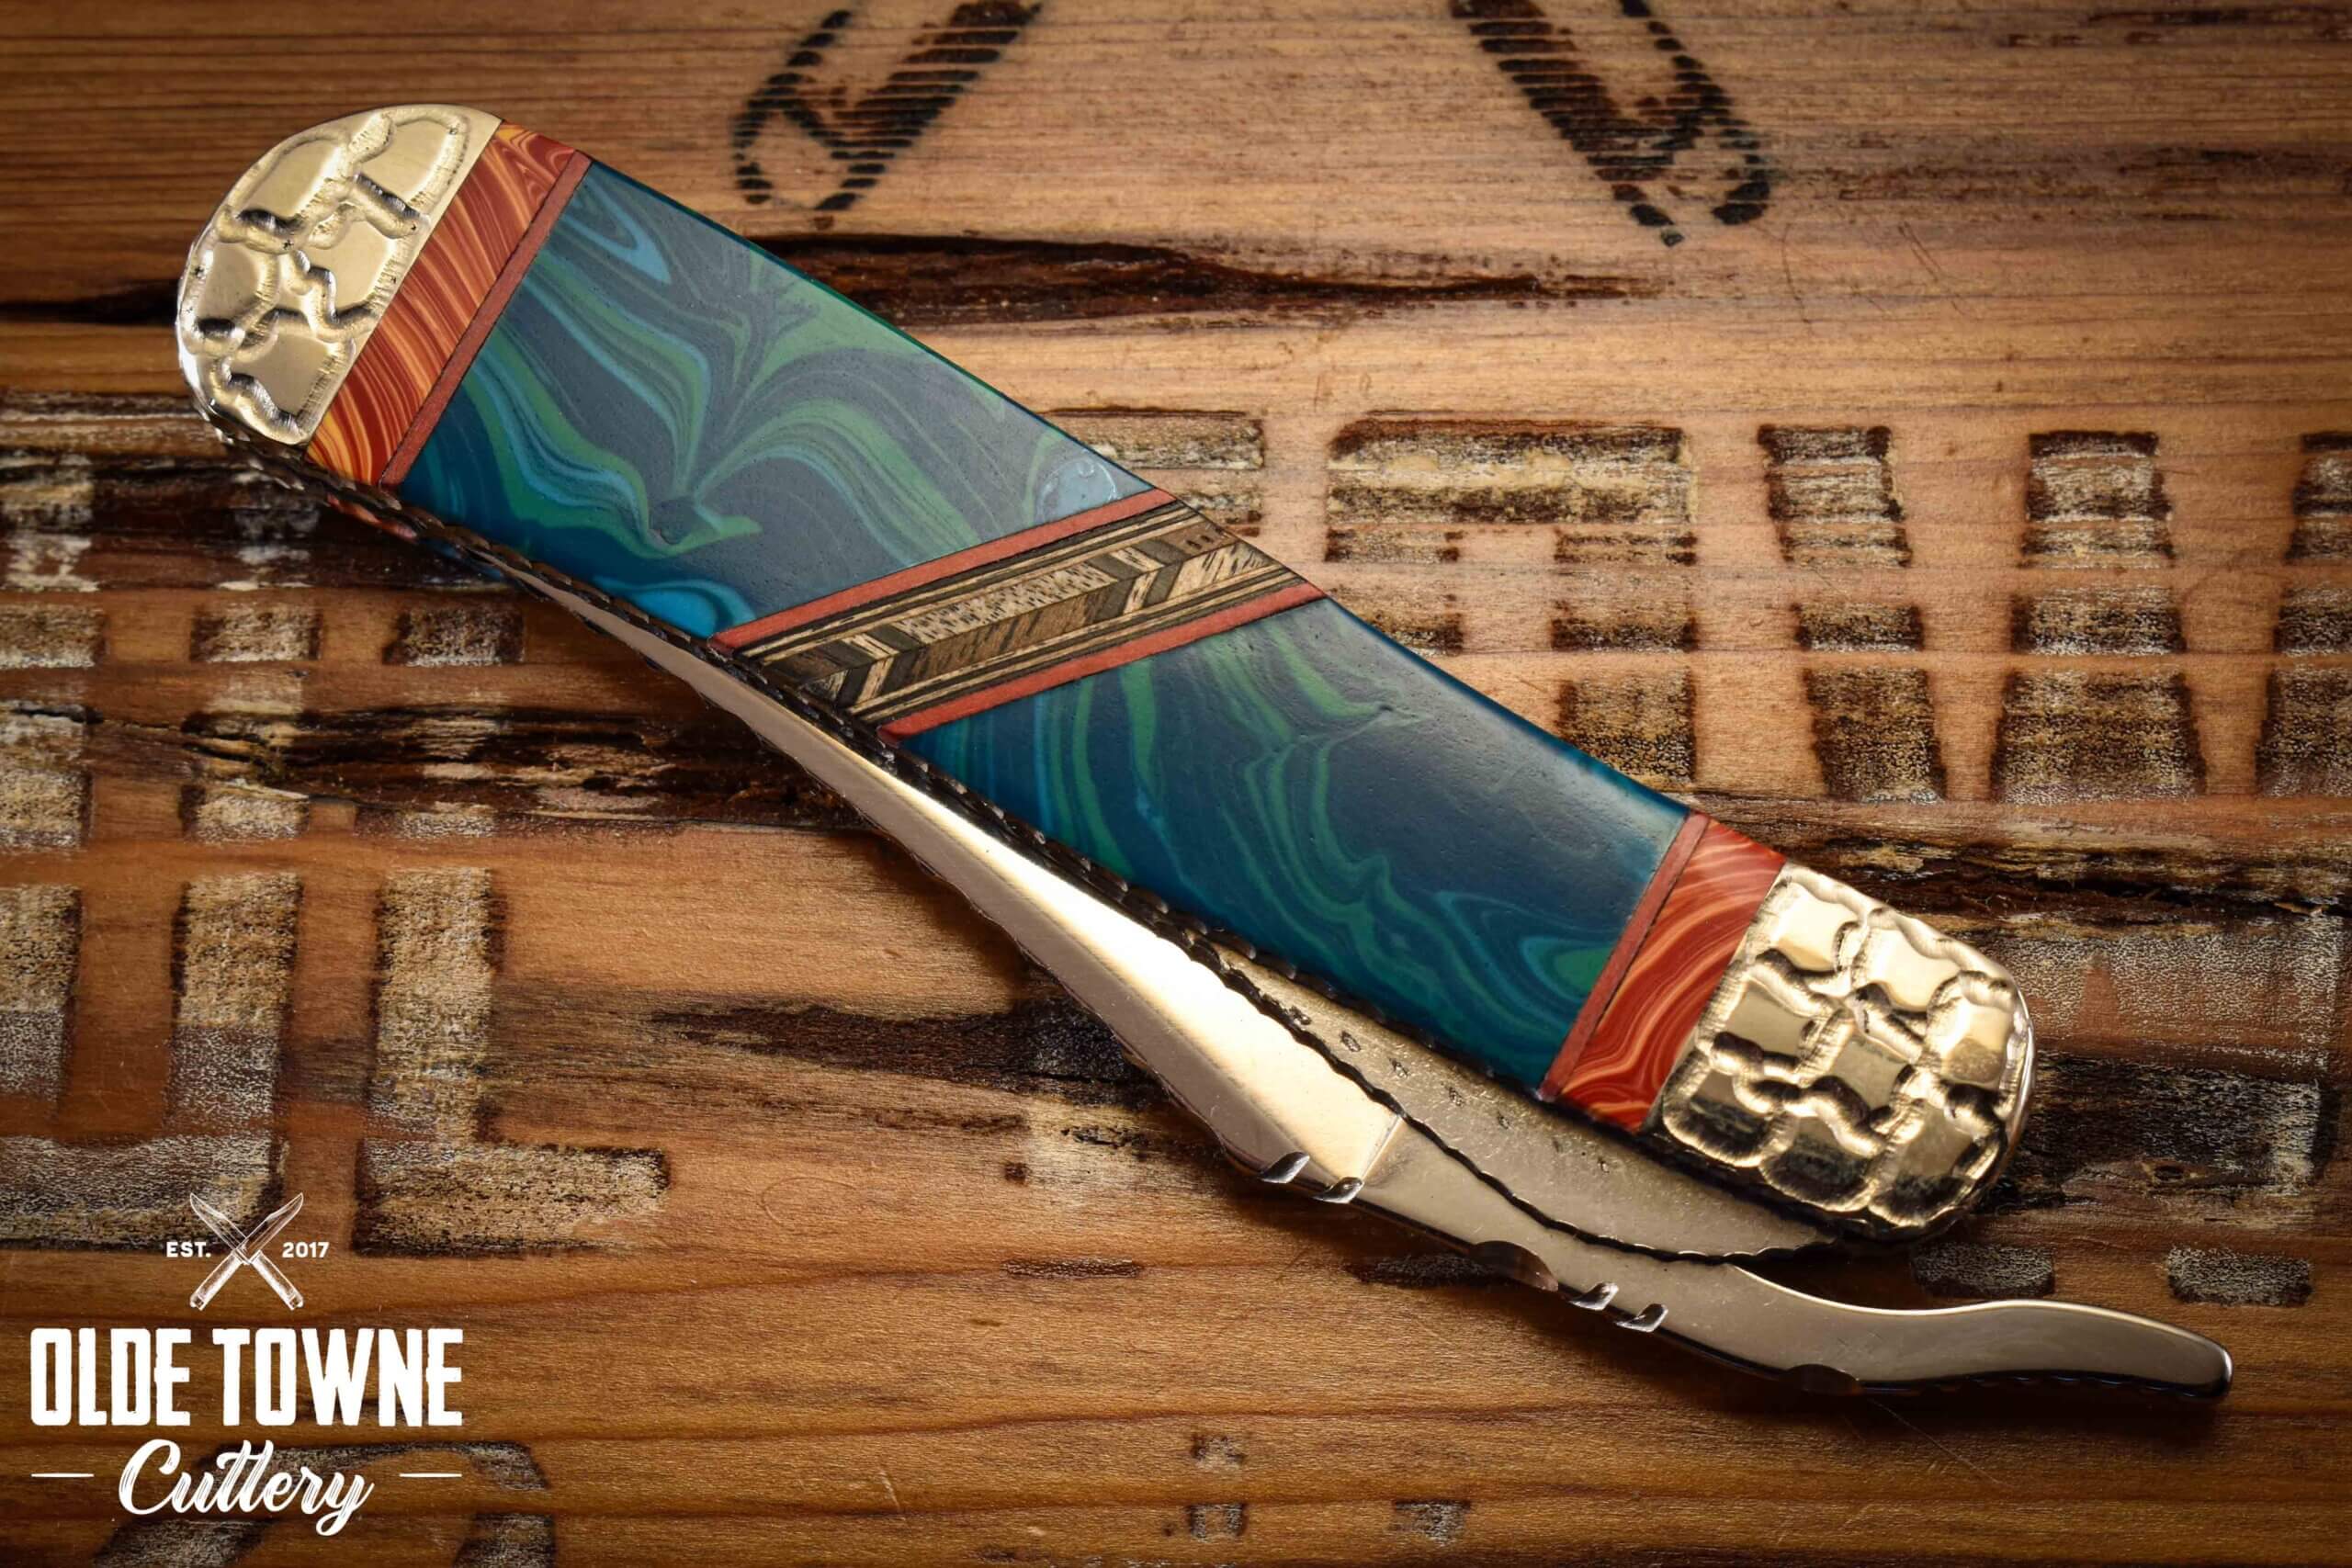 Painted Pony Case Russlock Teal w/Chevron